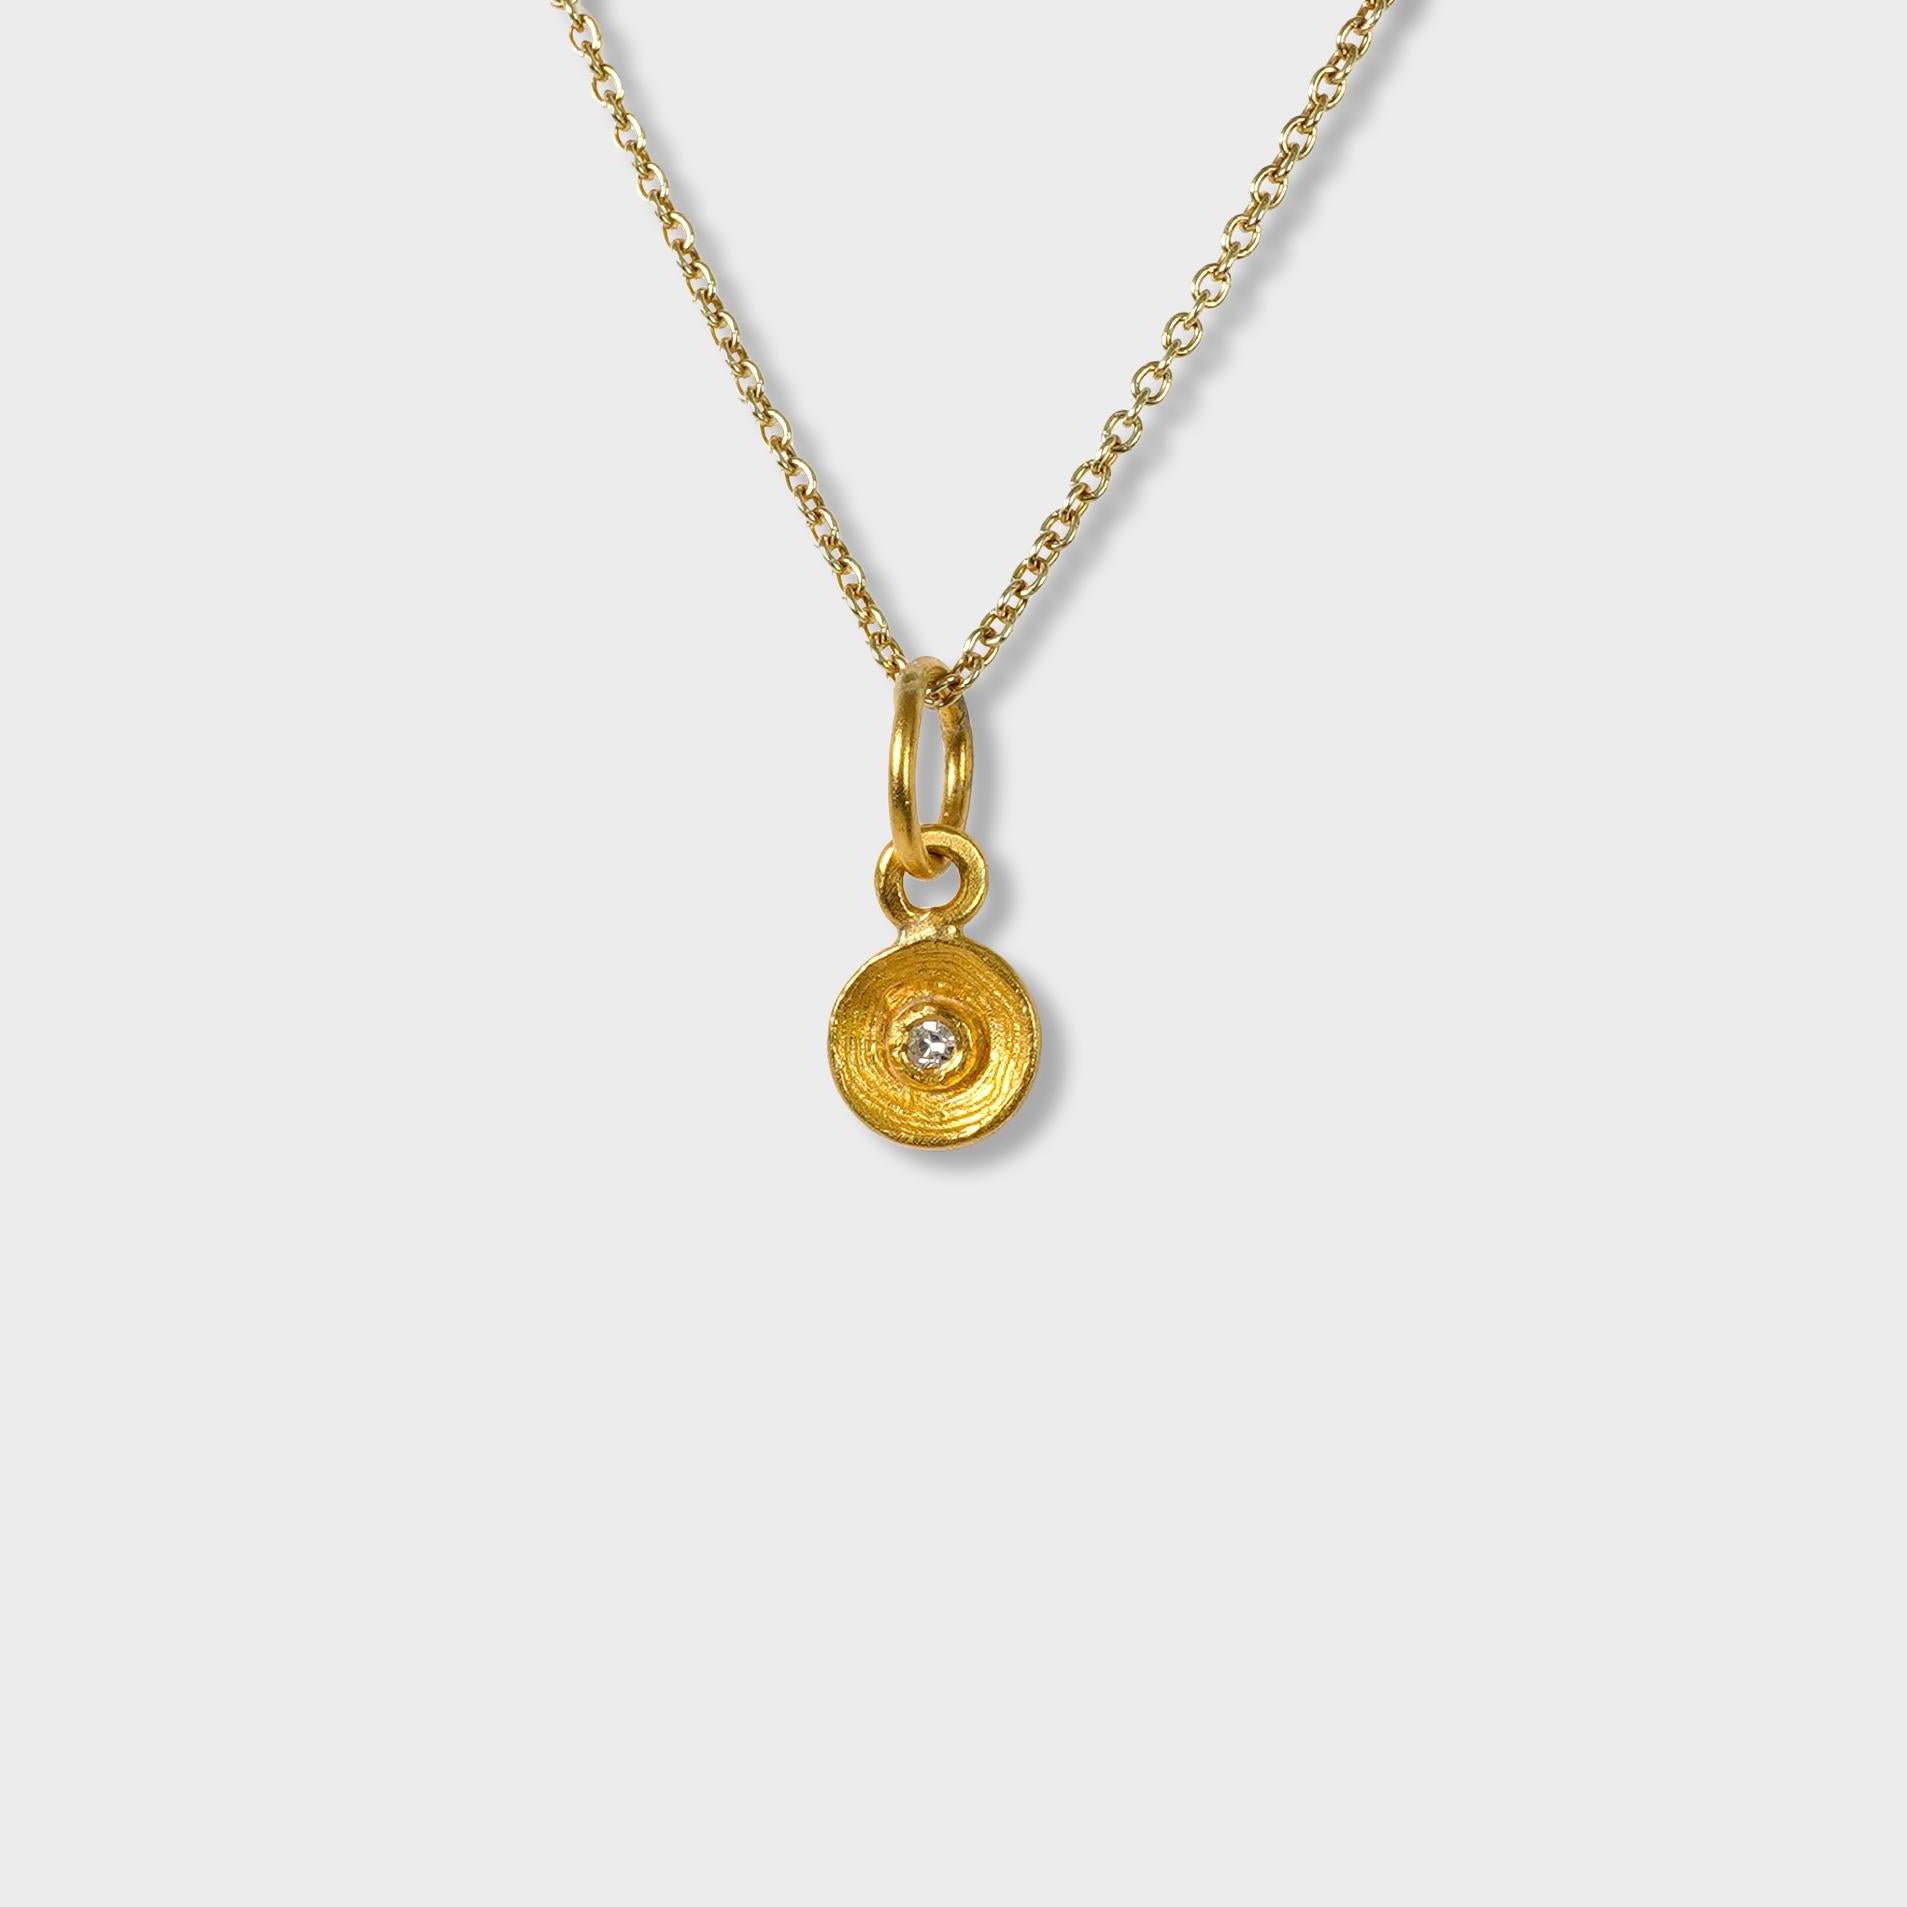 Mini, Rhythm of Life, Charm, Solid 24K Gold and 0.02ct Diamond

Size - Very Small Charm (Looks great paired and layered with other charm pendants)
Approximately 12 mm
1 Diamond - 0.02cts
24K Solid Gold - 0.81 grams

THE STORY

The Rhythm of Life